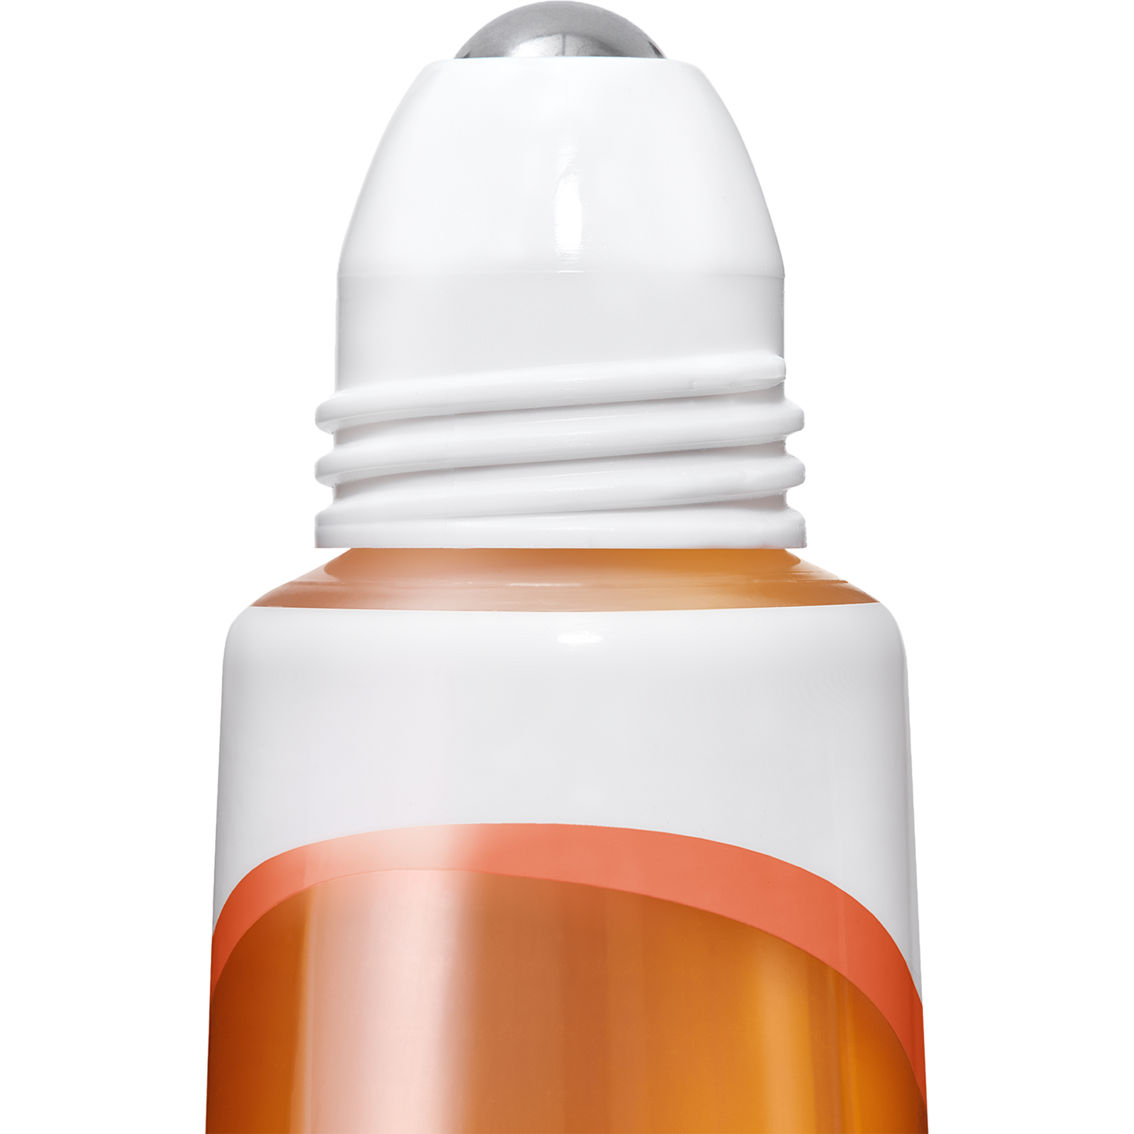 Essie Nail Care On a Roll Apricot Cuticle Oil - Image 6 of 6